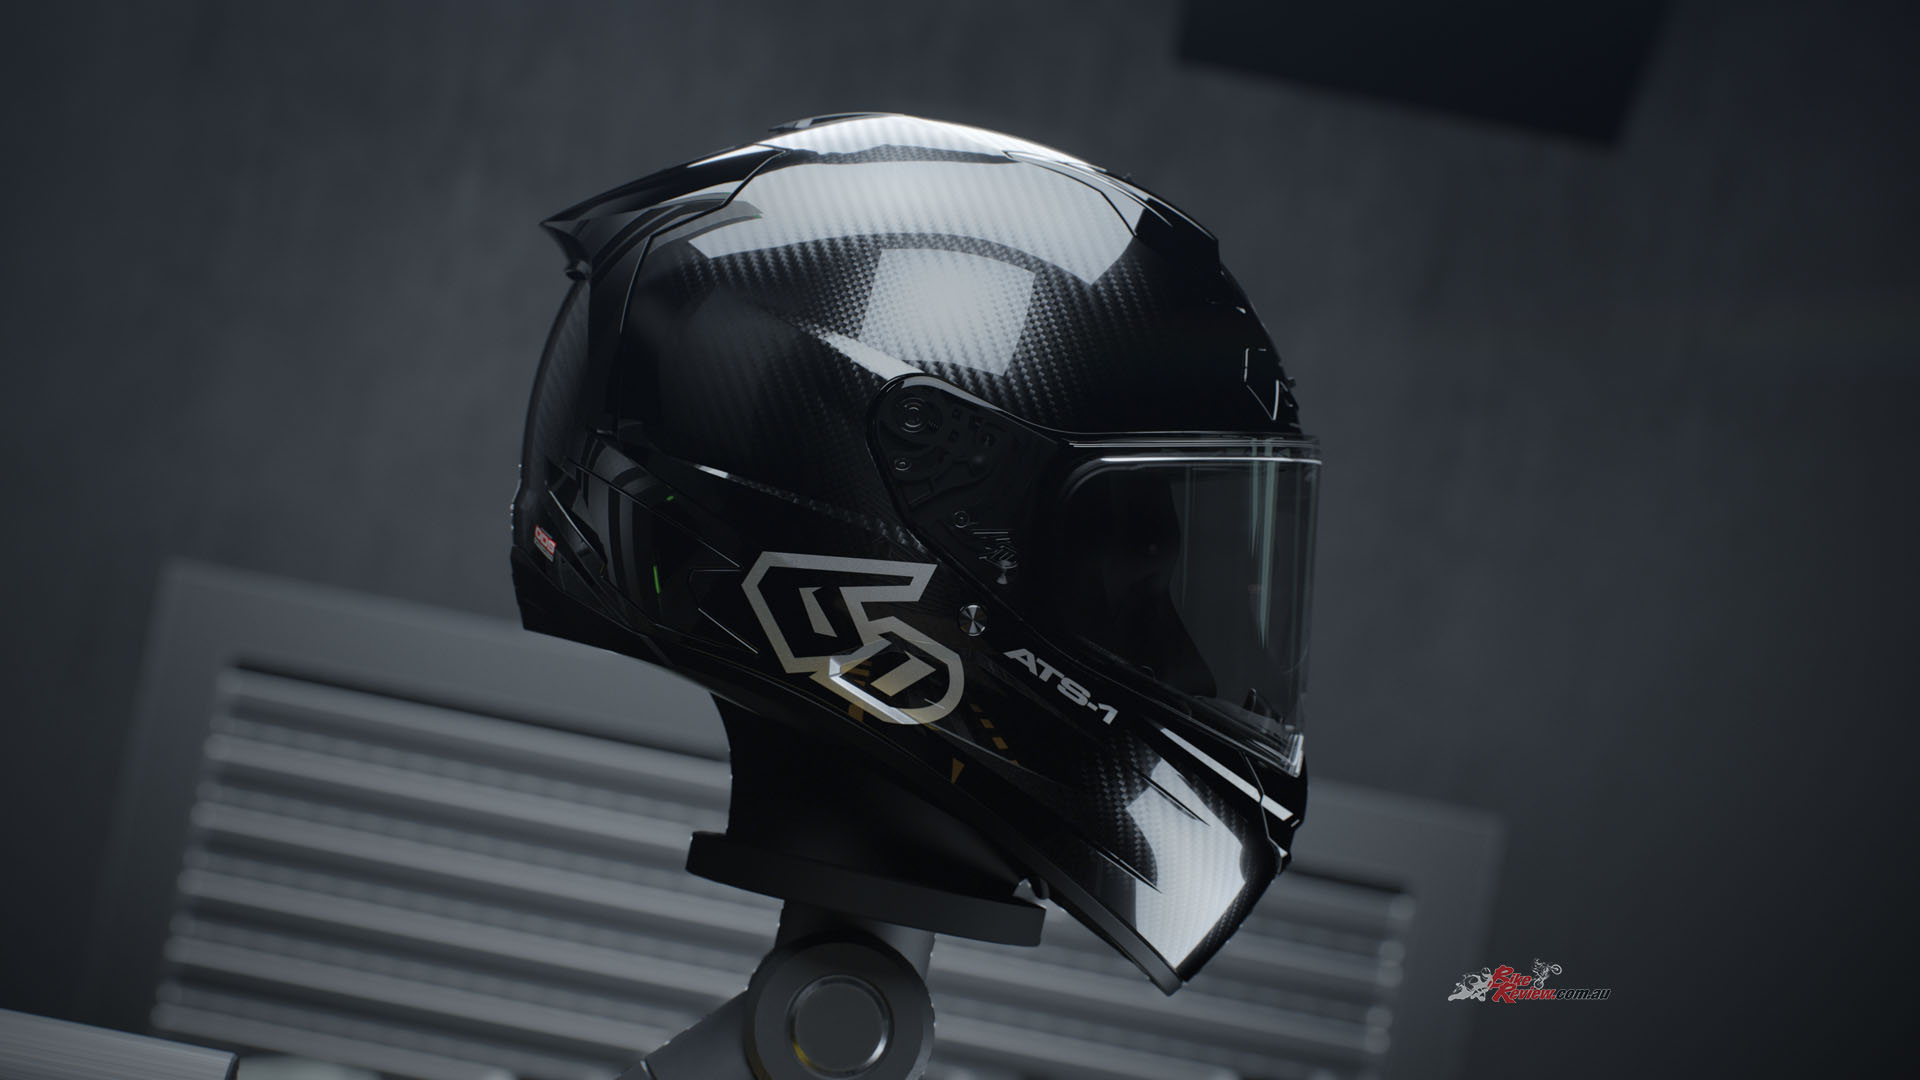 It's about time I changed up my main lid, I'll be wearing the updated 6D ATS-1R lid over the next few months.